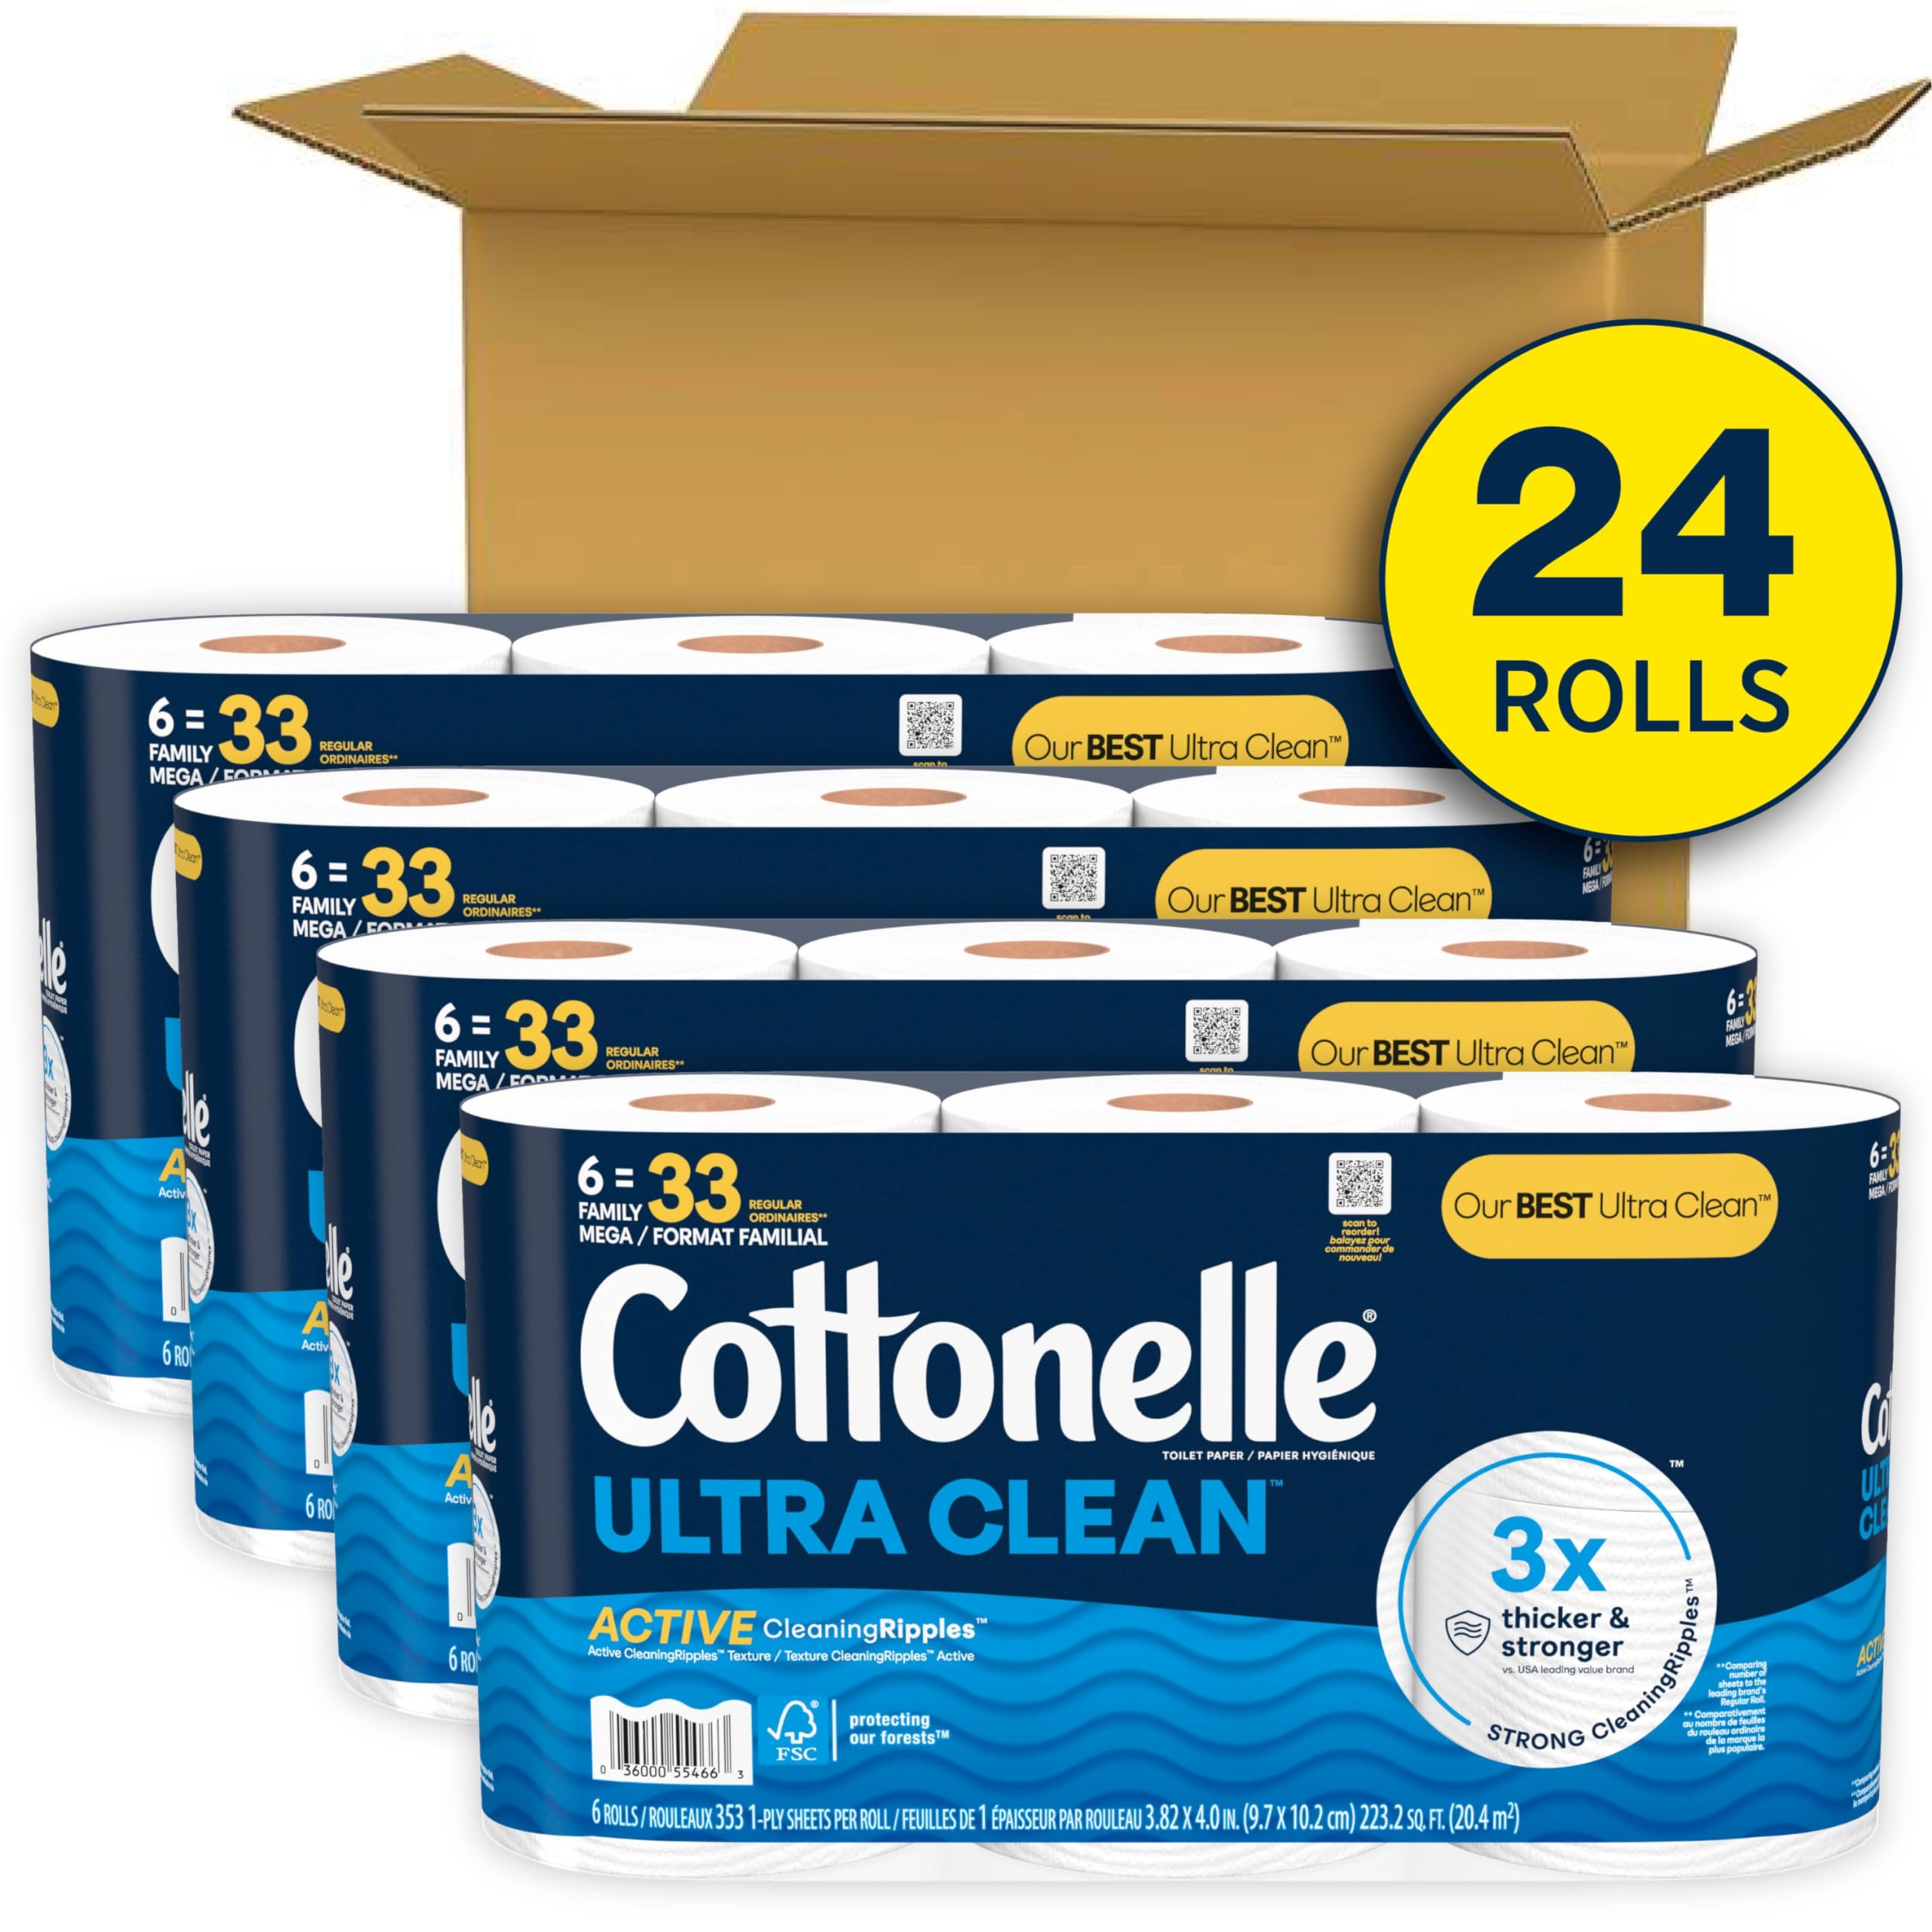 Cottonelle Ultra Clean Toilet Paper with Active CleaningRipples Texture, 24 Family Mega Rolls (24 Family Mega Rolls = 132 Regular Rolls) (4 Packs of 6), 353 Sheets Per Roll, Packaging May Vary